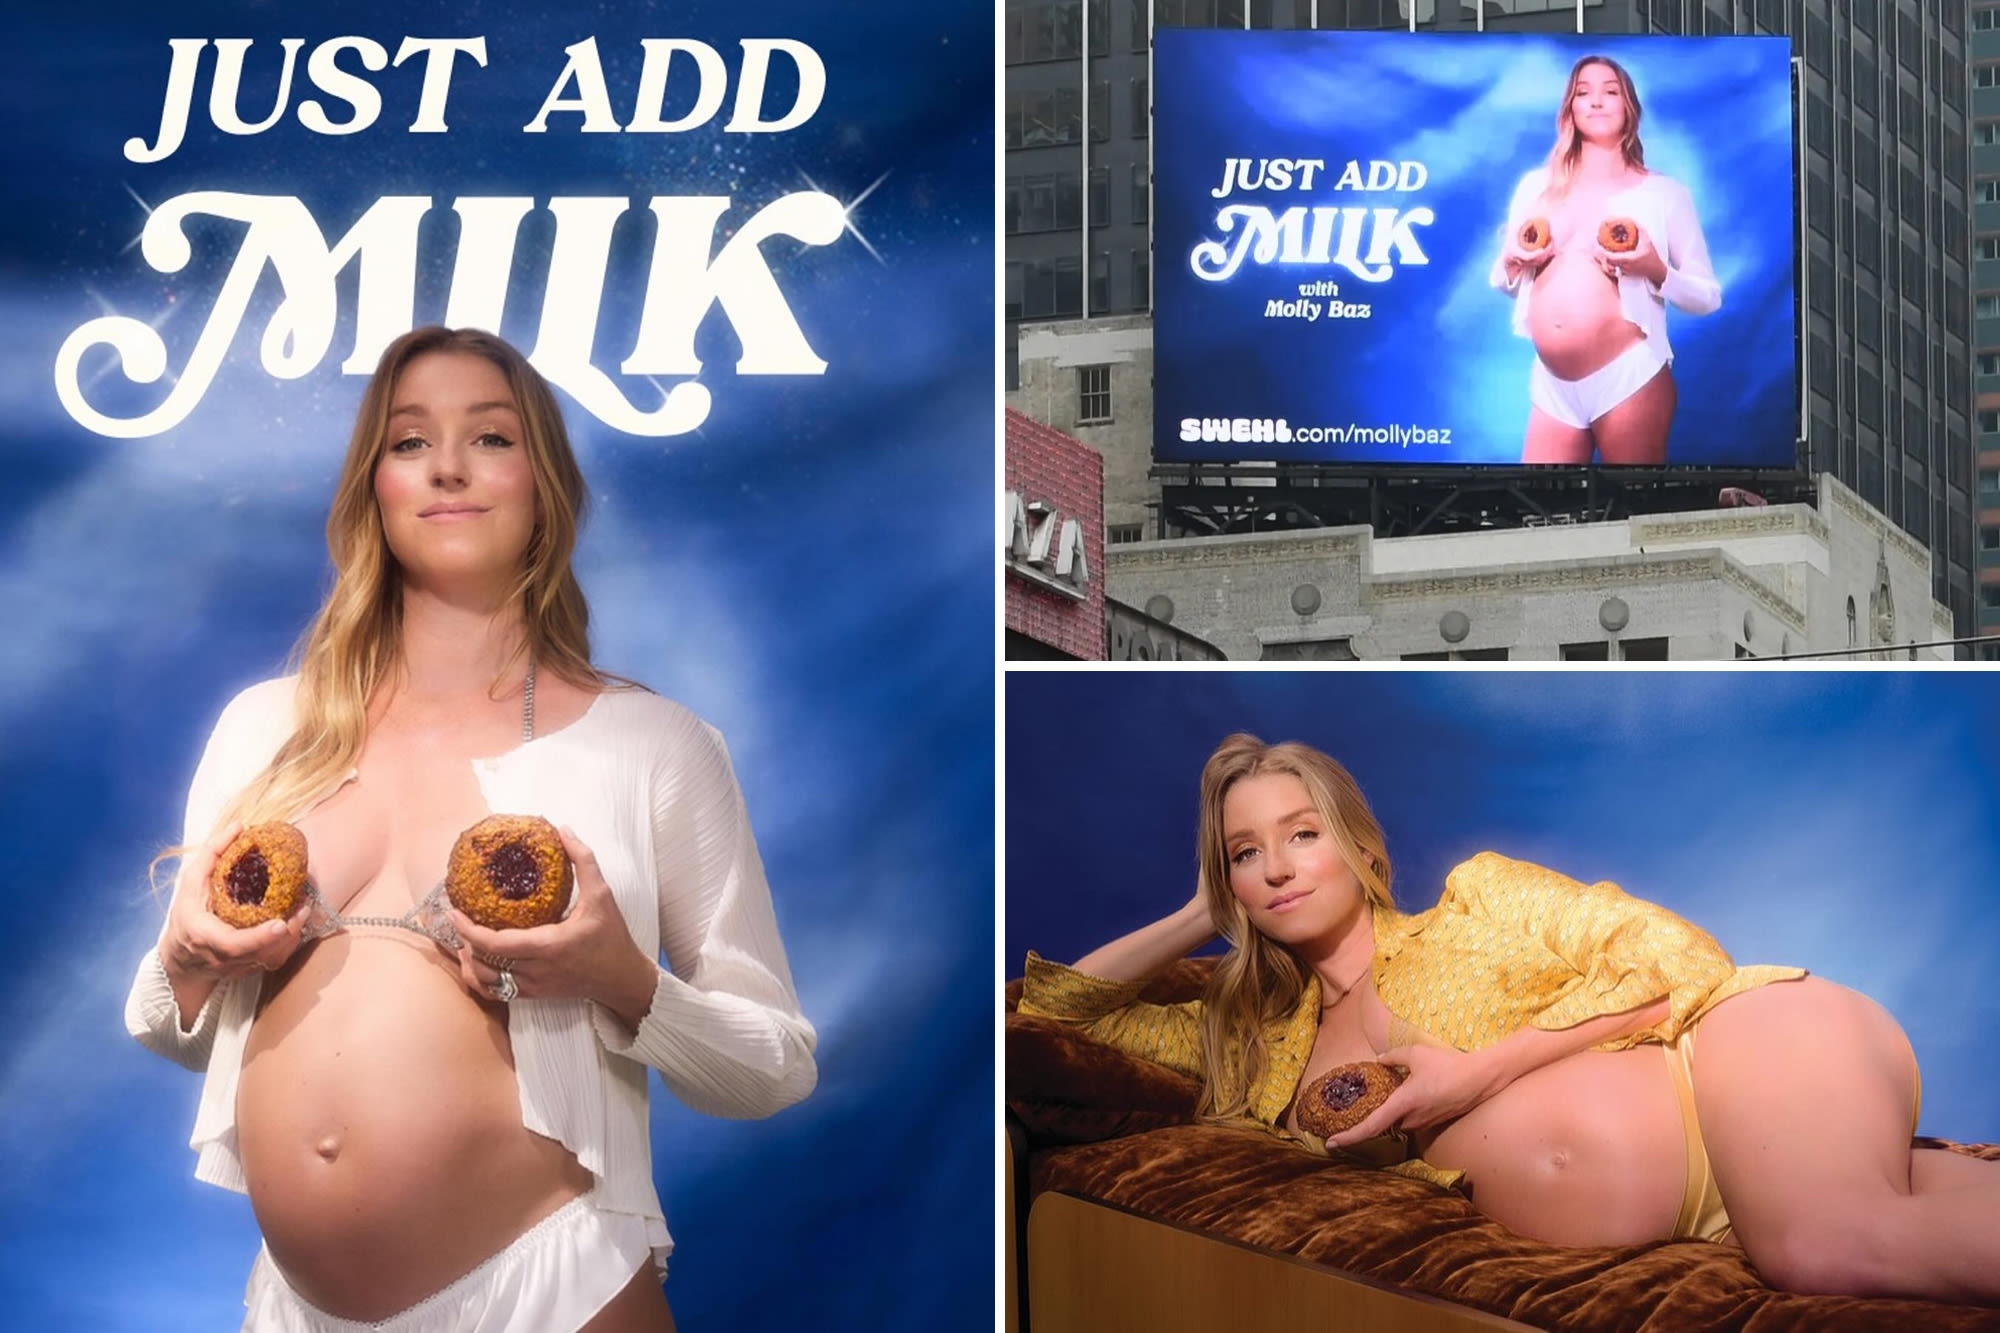 Times Square ad featuring pregnant author covering nipples with cookies ‘too much’ for billboard owner